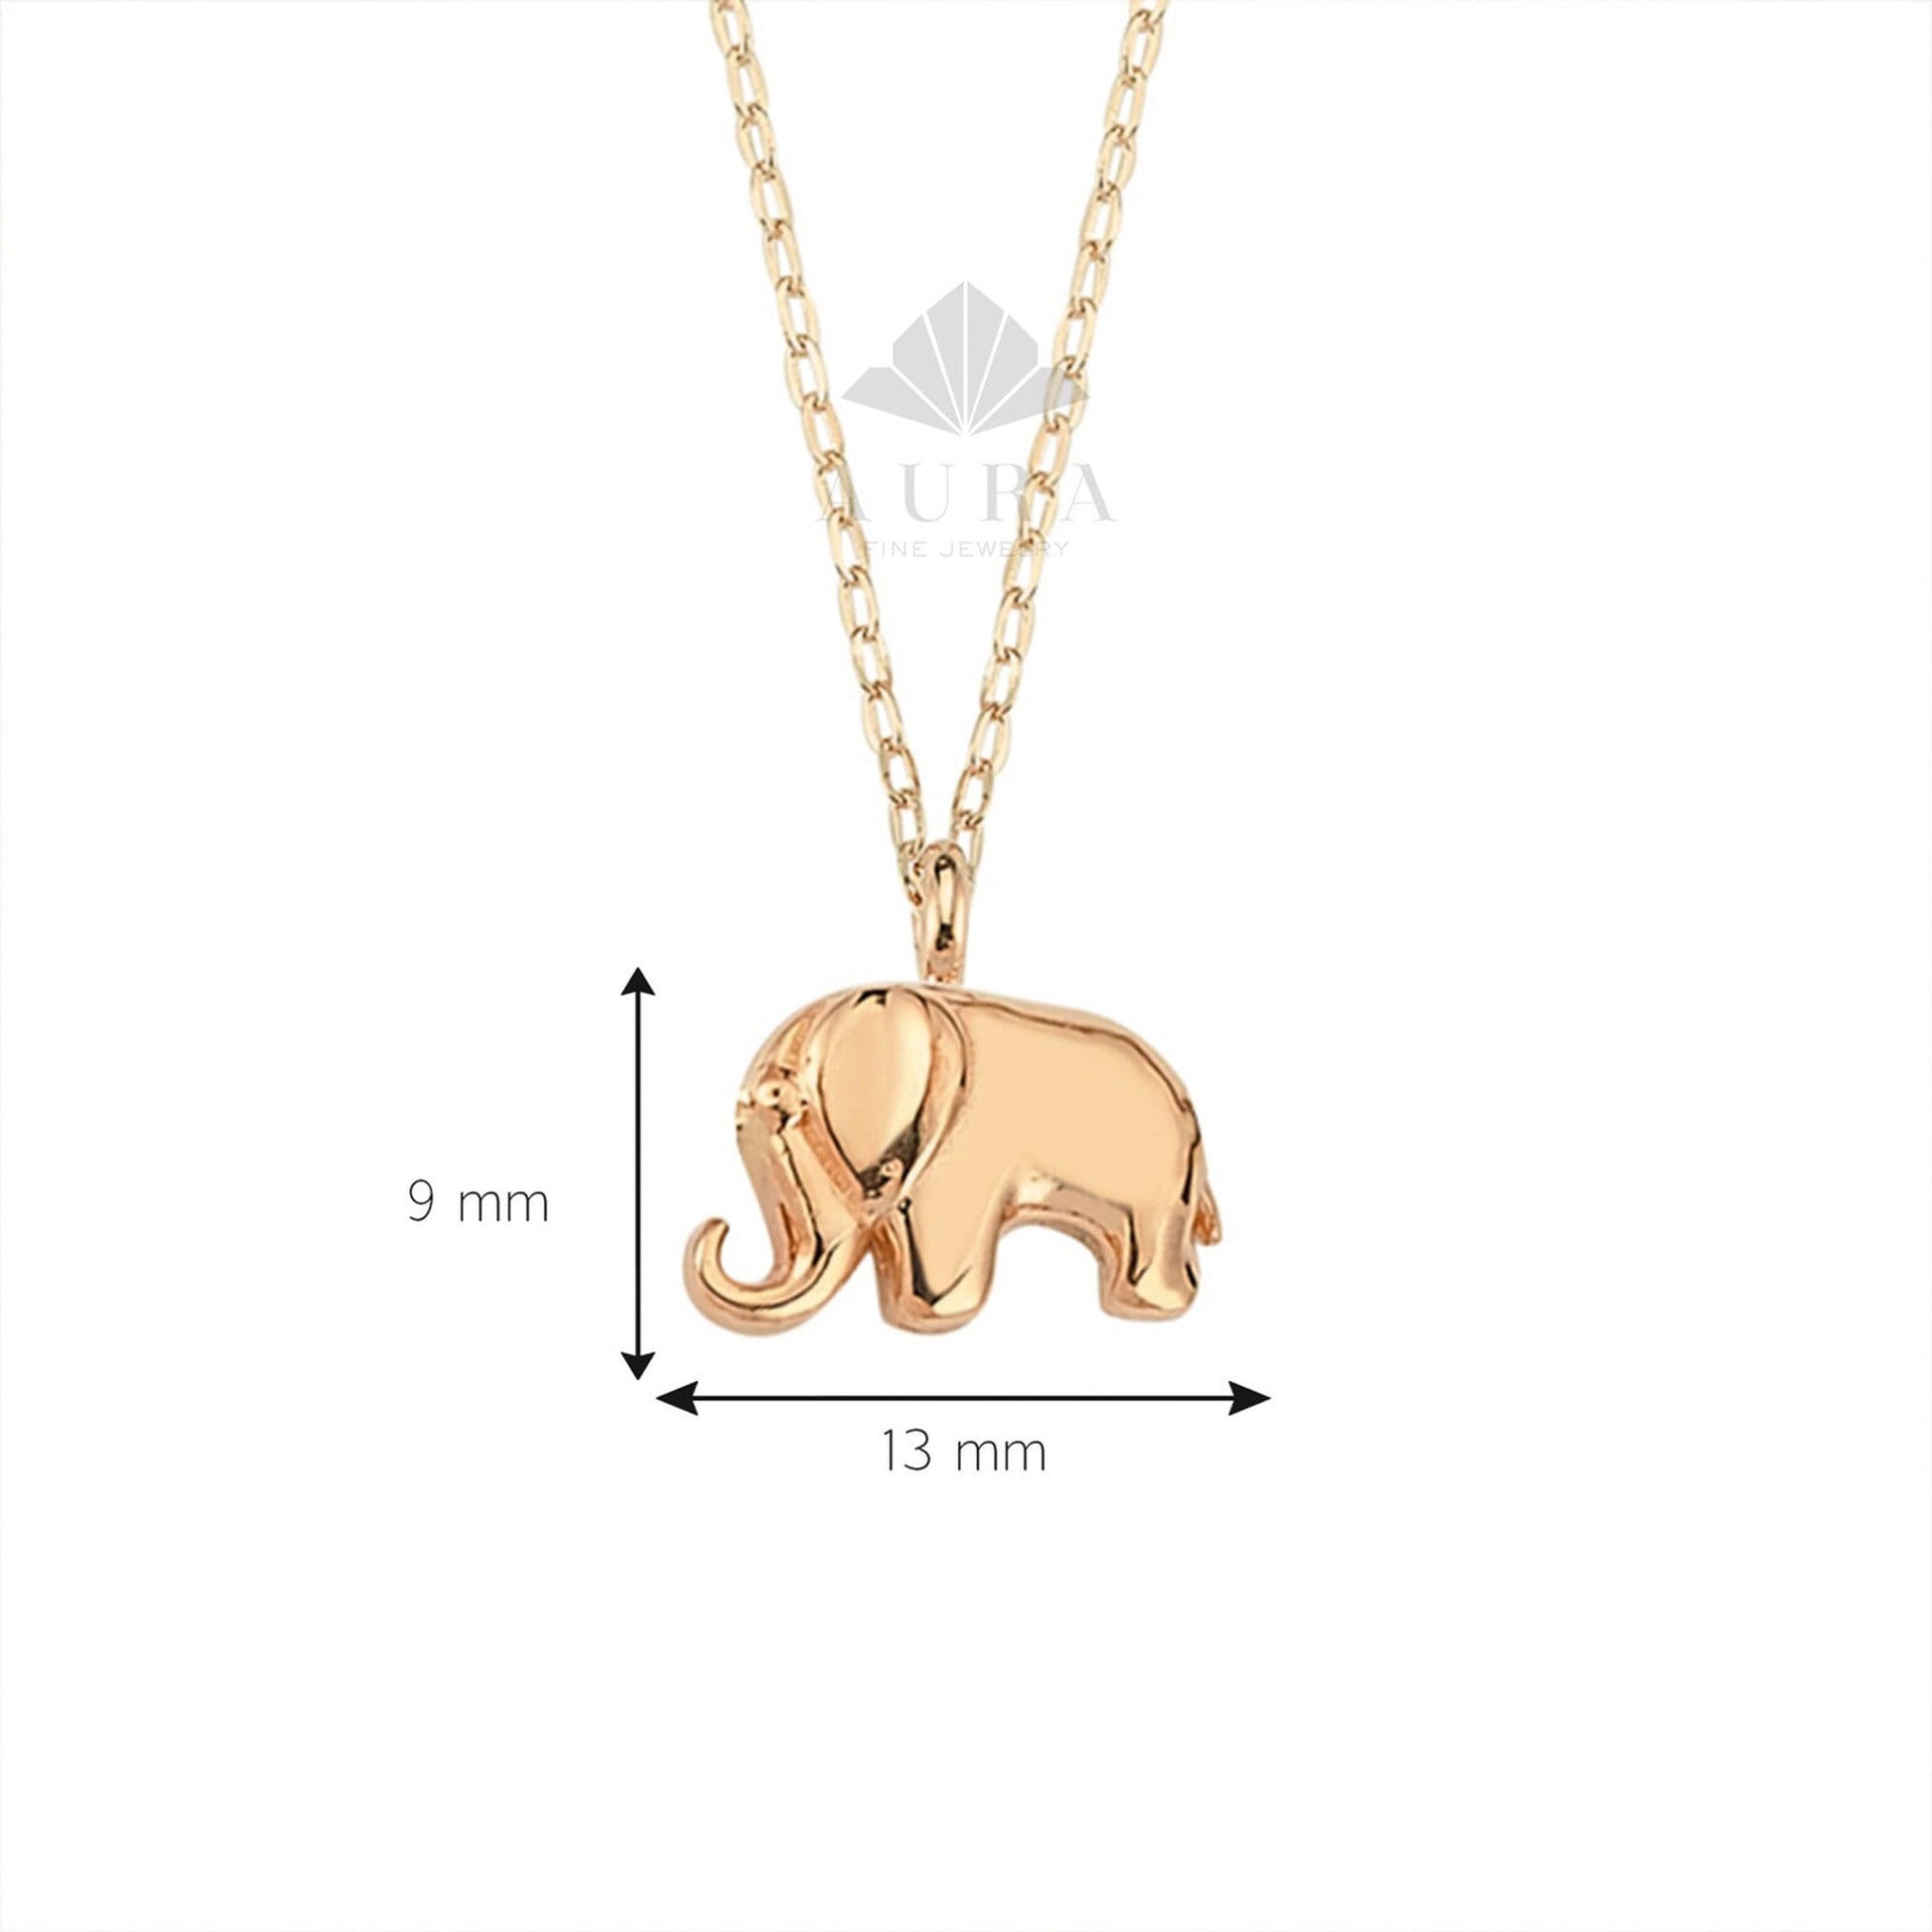 14K Gold Elephant Necklace, Elephant Pendant Necklace, Tiny Elephant Charm, Dainty Gold Chain Choker, Animal Jewelry, Gift For Her